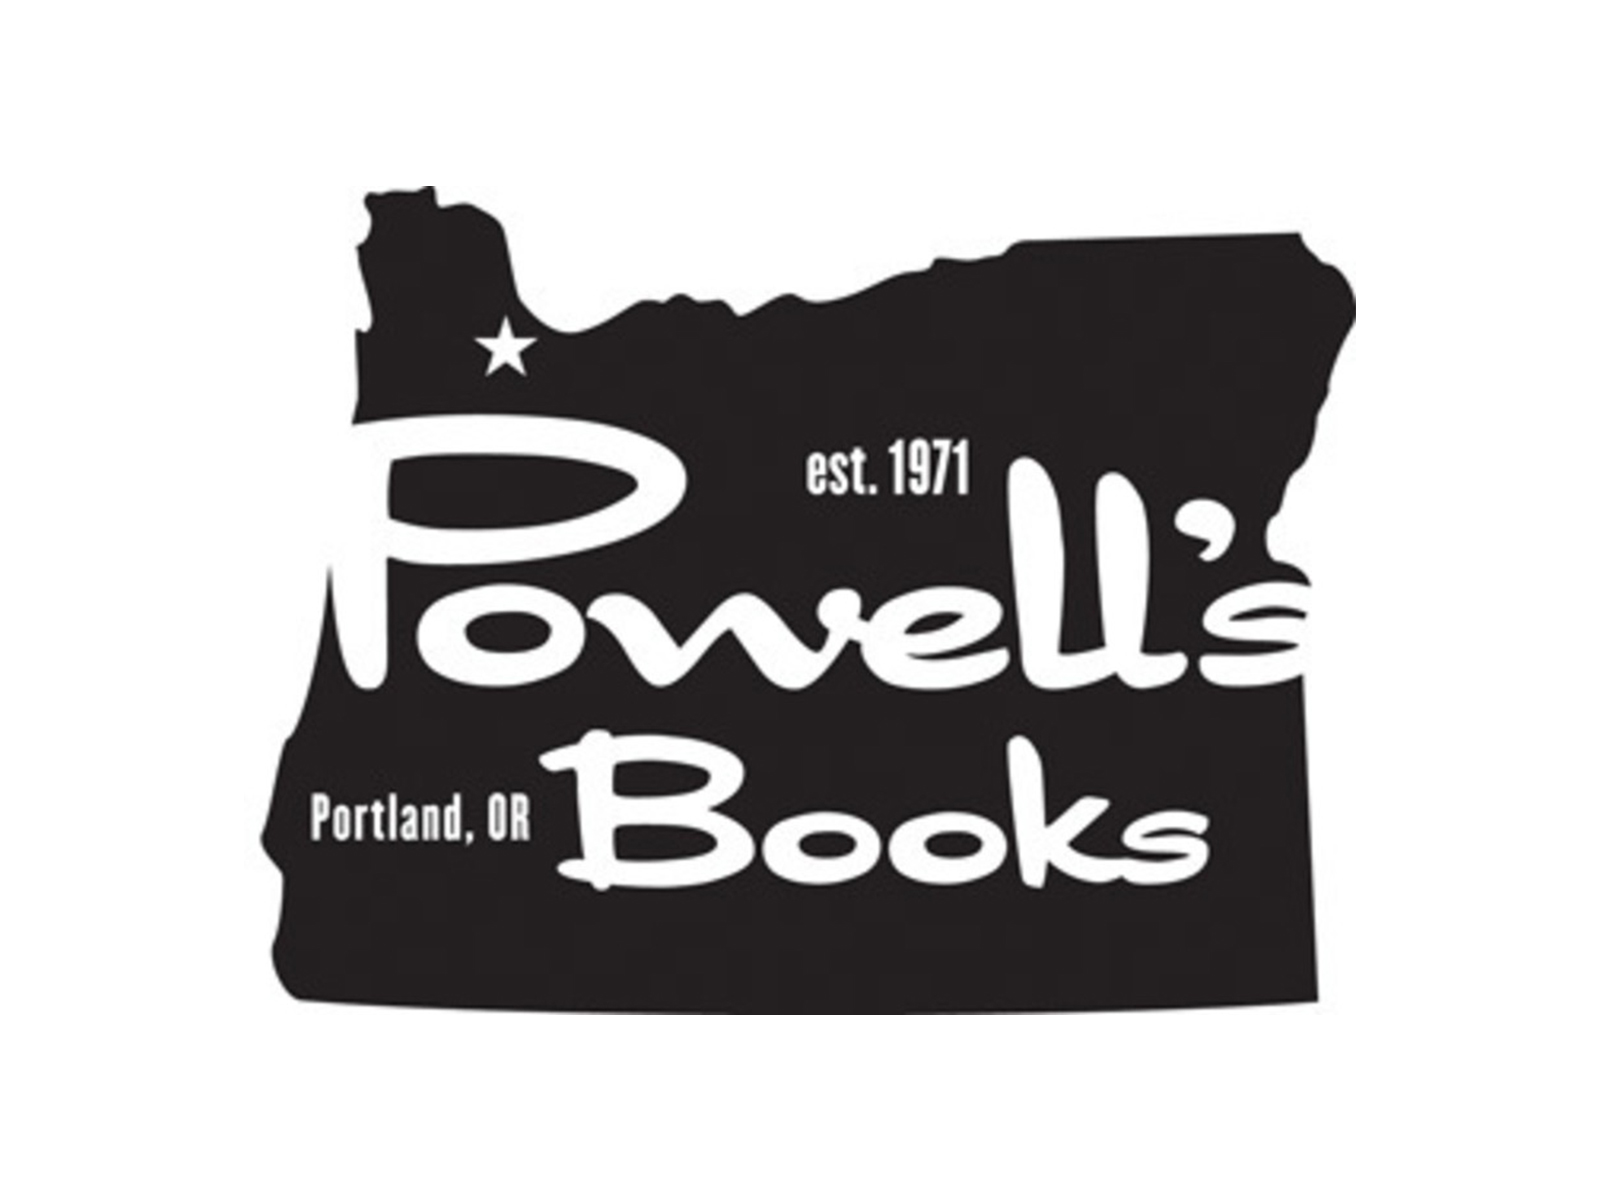  Powell's Midyear Roundup  The Best Books of 2019 (So Far)